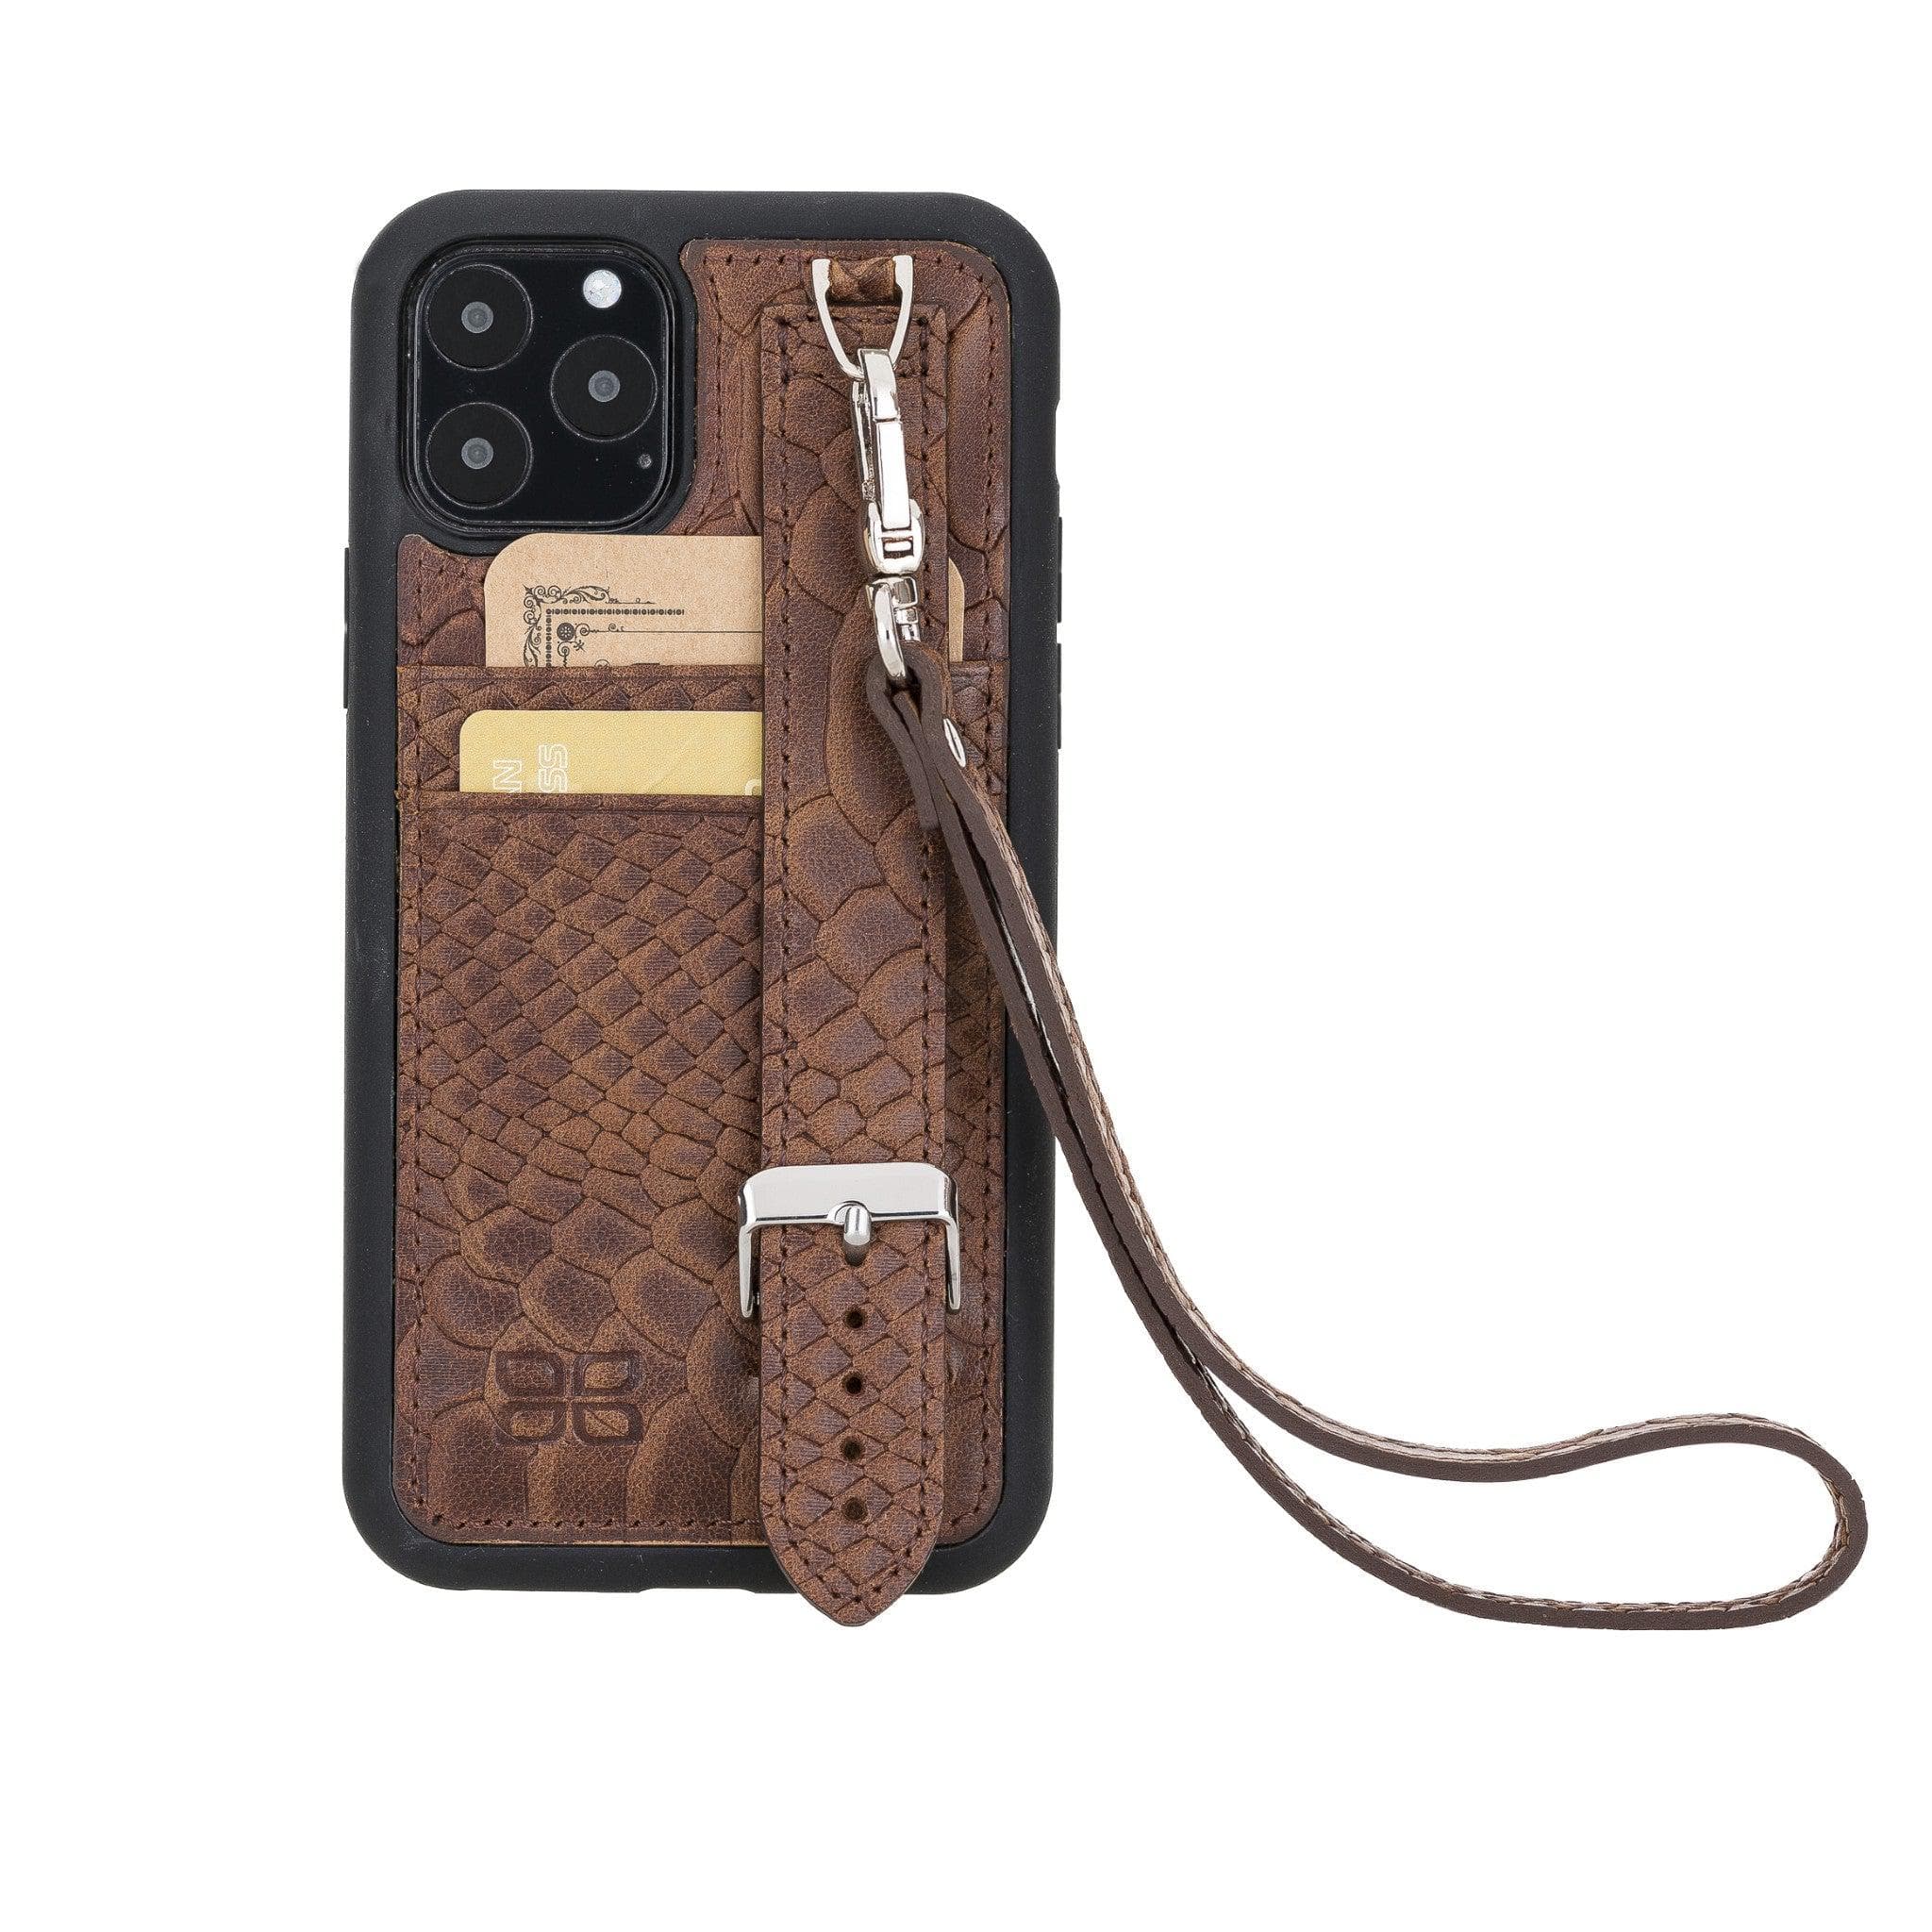 Flexible Leather Back Cover with Hand Strap for iPhone 11 Series iPhone 11 Pro Max / Snake Brown Bouletta LTD